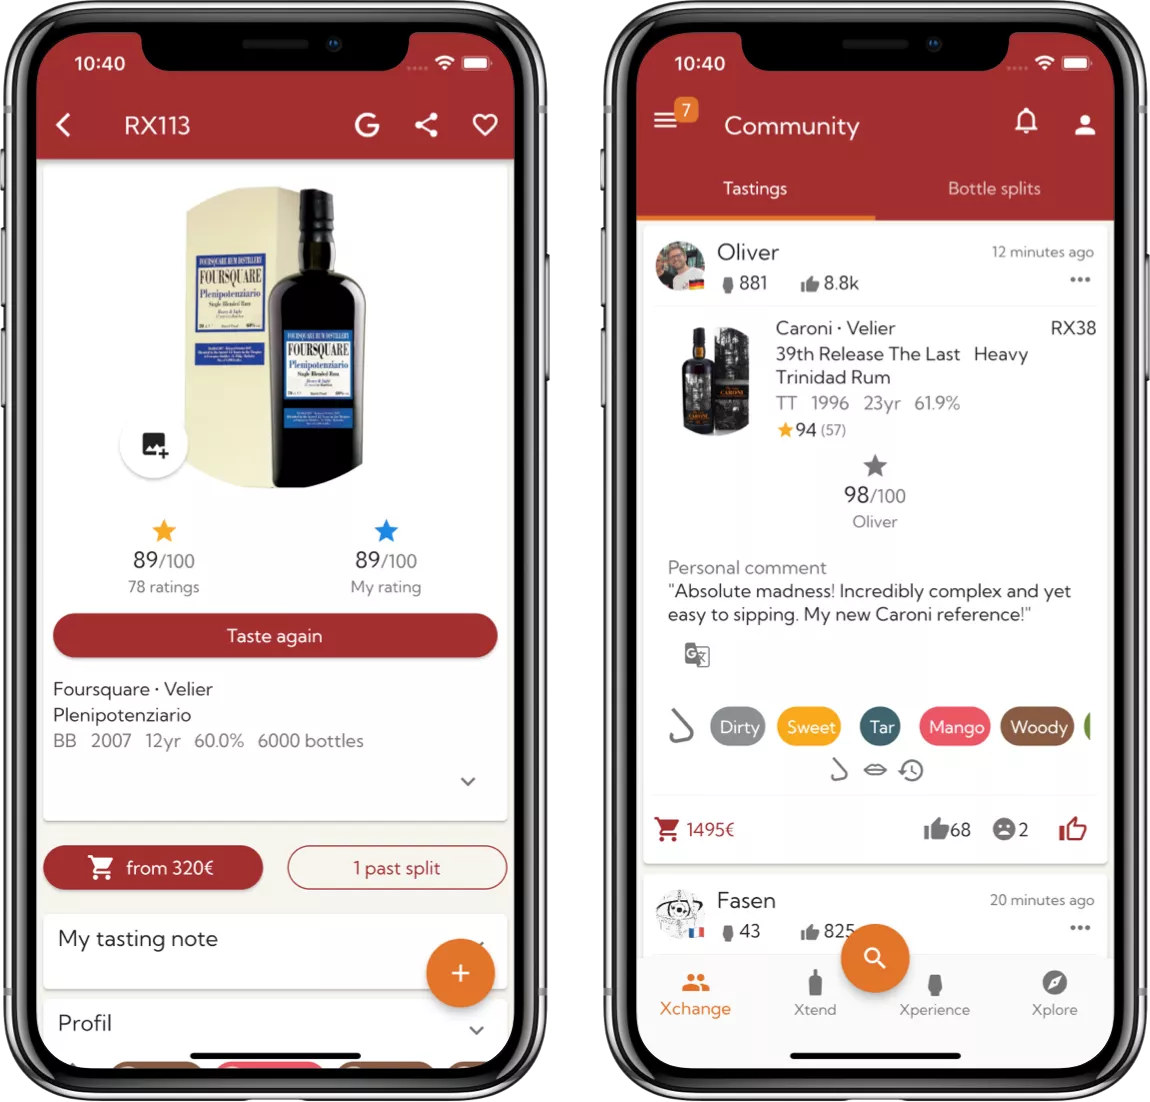 Screenshot snippets from the iOS app. Left: Overview of the rum Foursquare Plenipotenziario. Right: Community feed view with new tasting impressions.